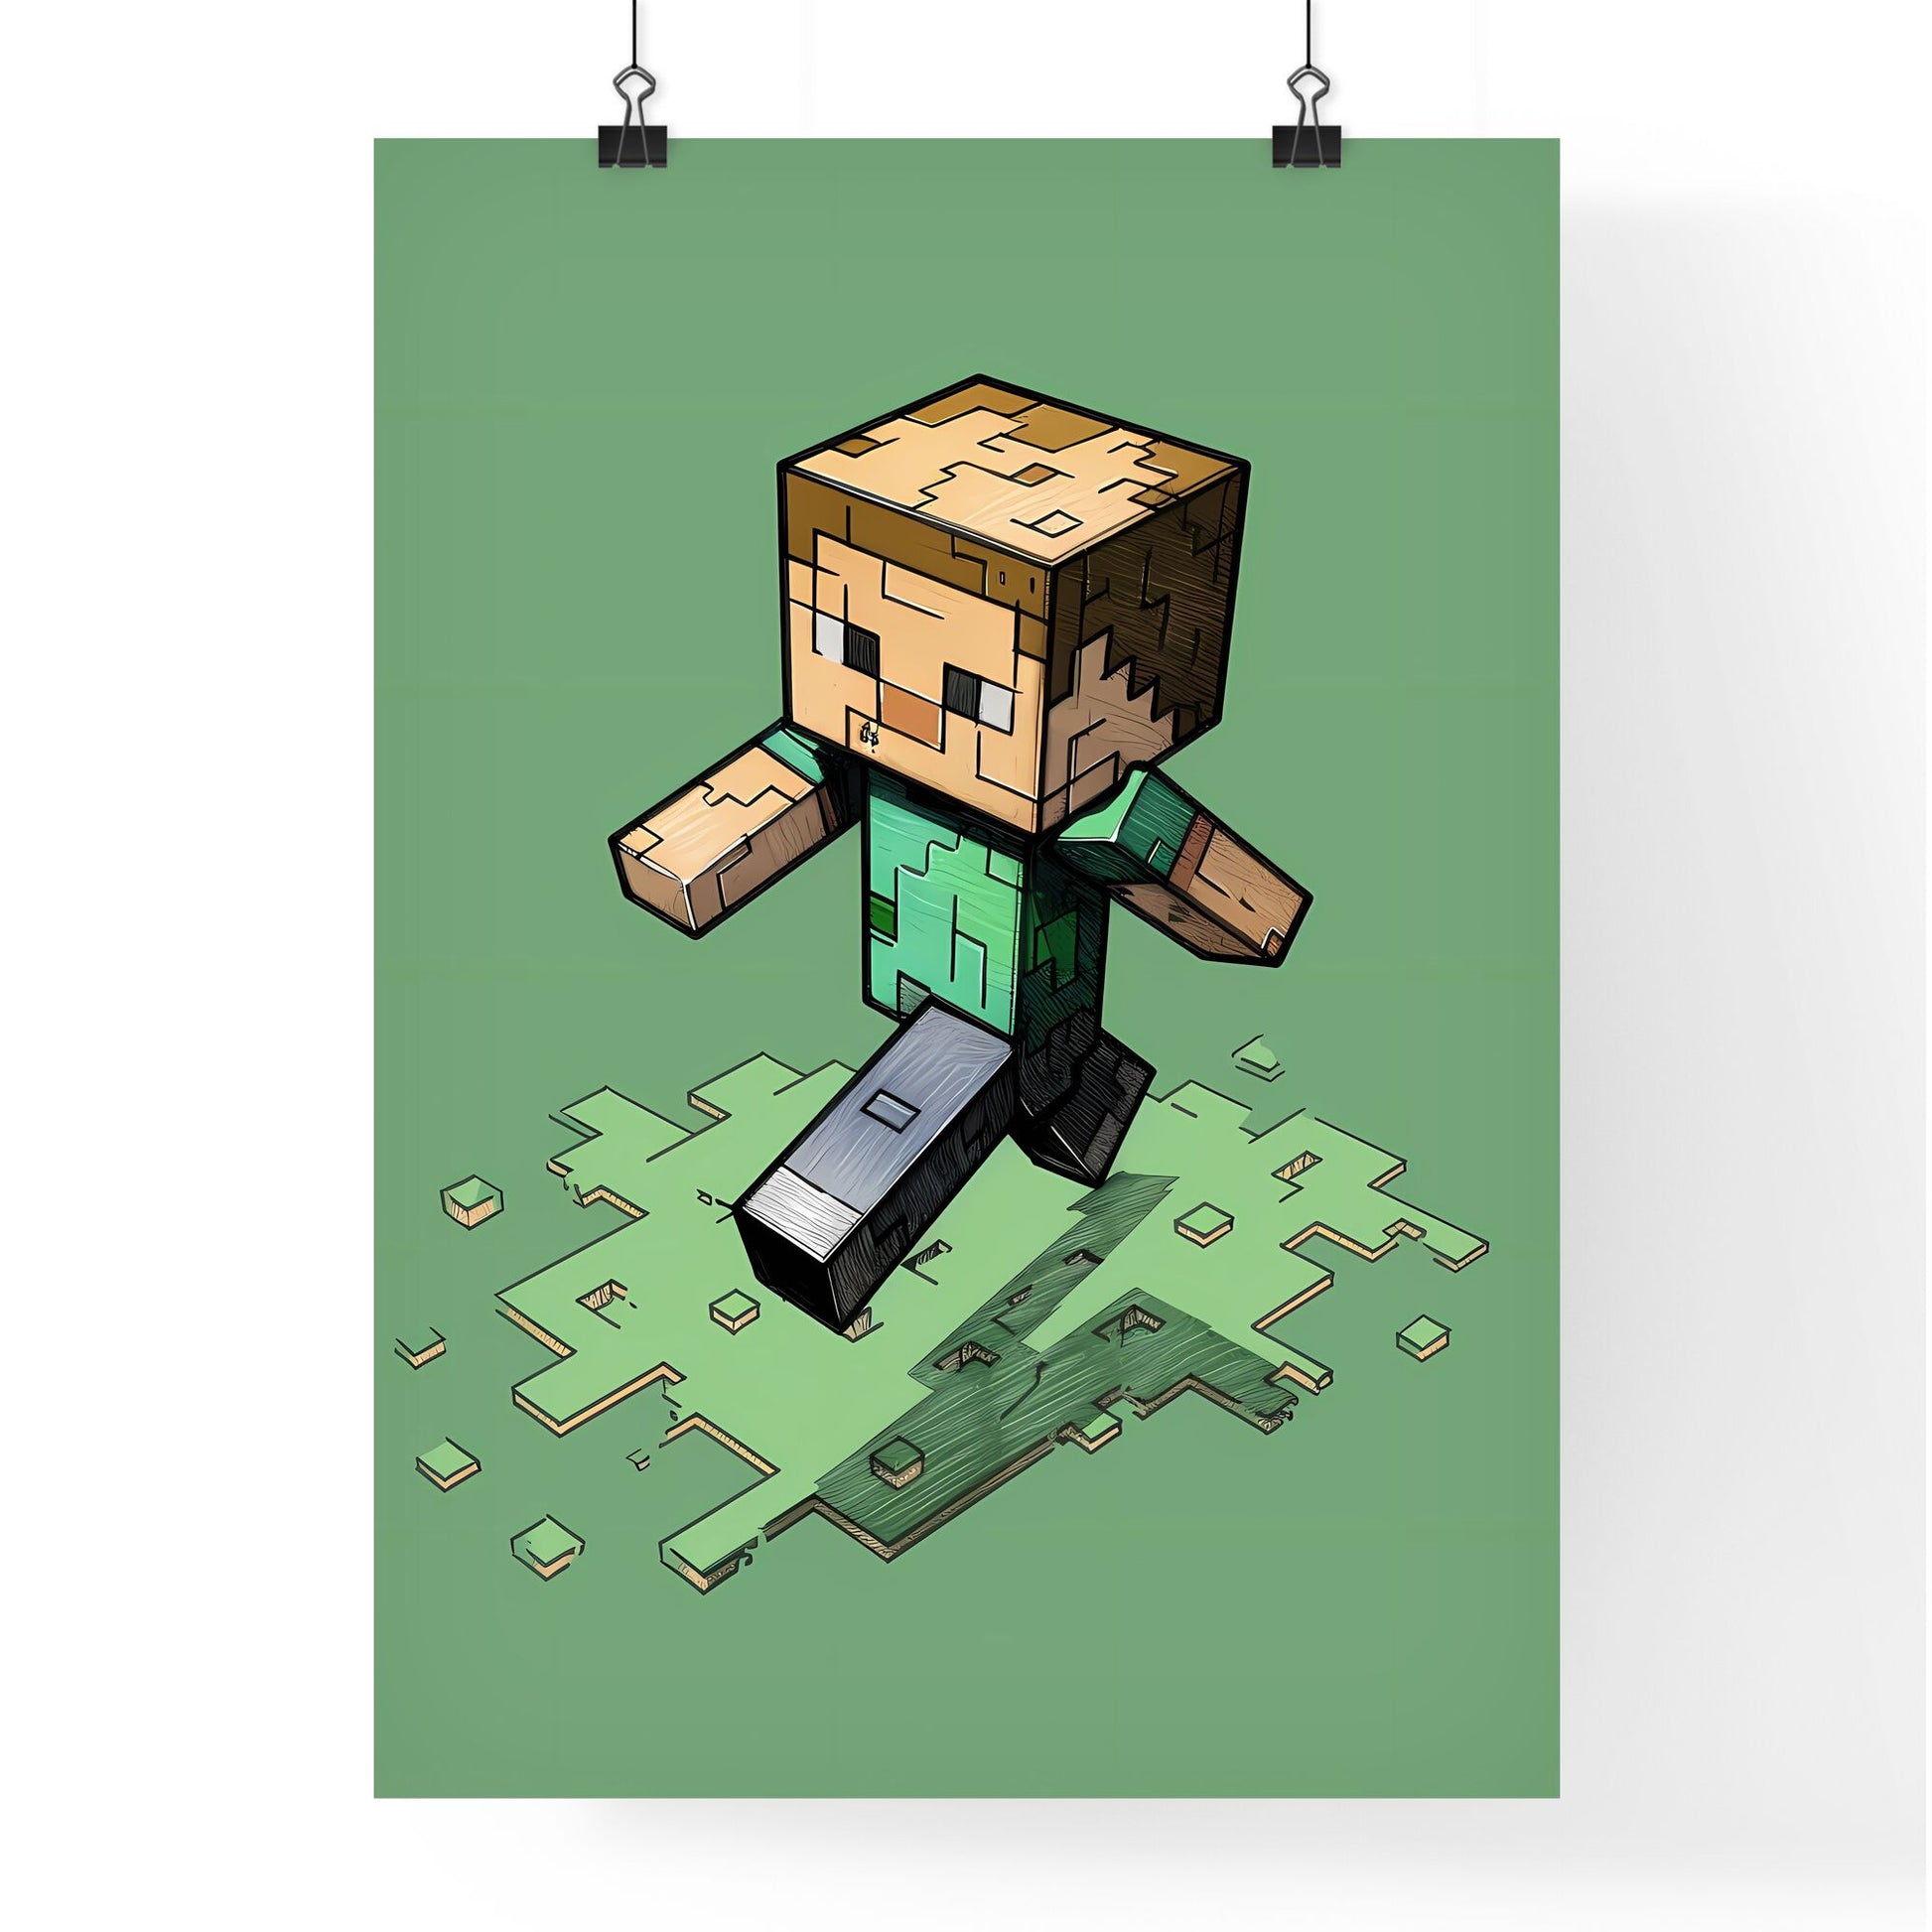 Pixelated Minecraft Character in Vibrant Green Environment: Animated GIF, Future Tech, New York School Art Default Title